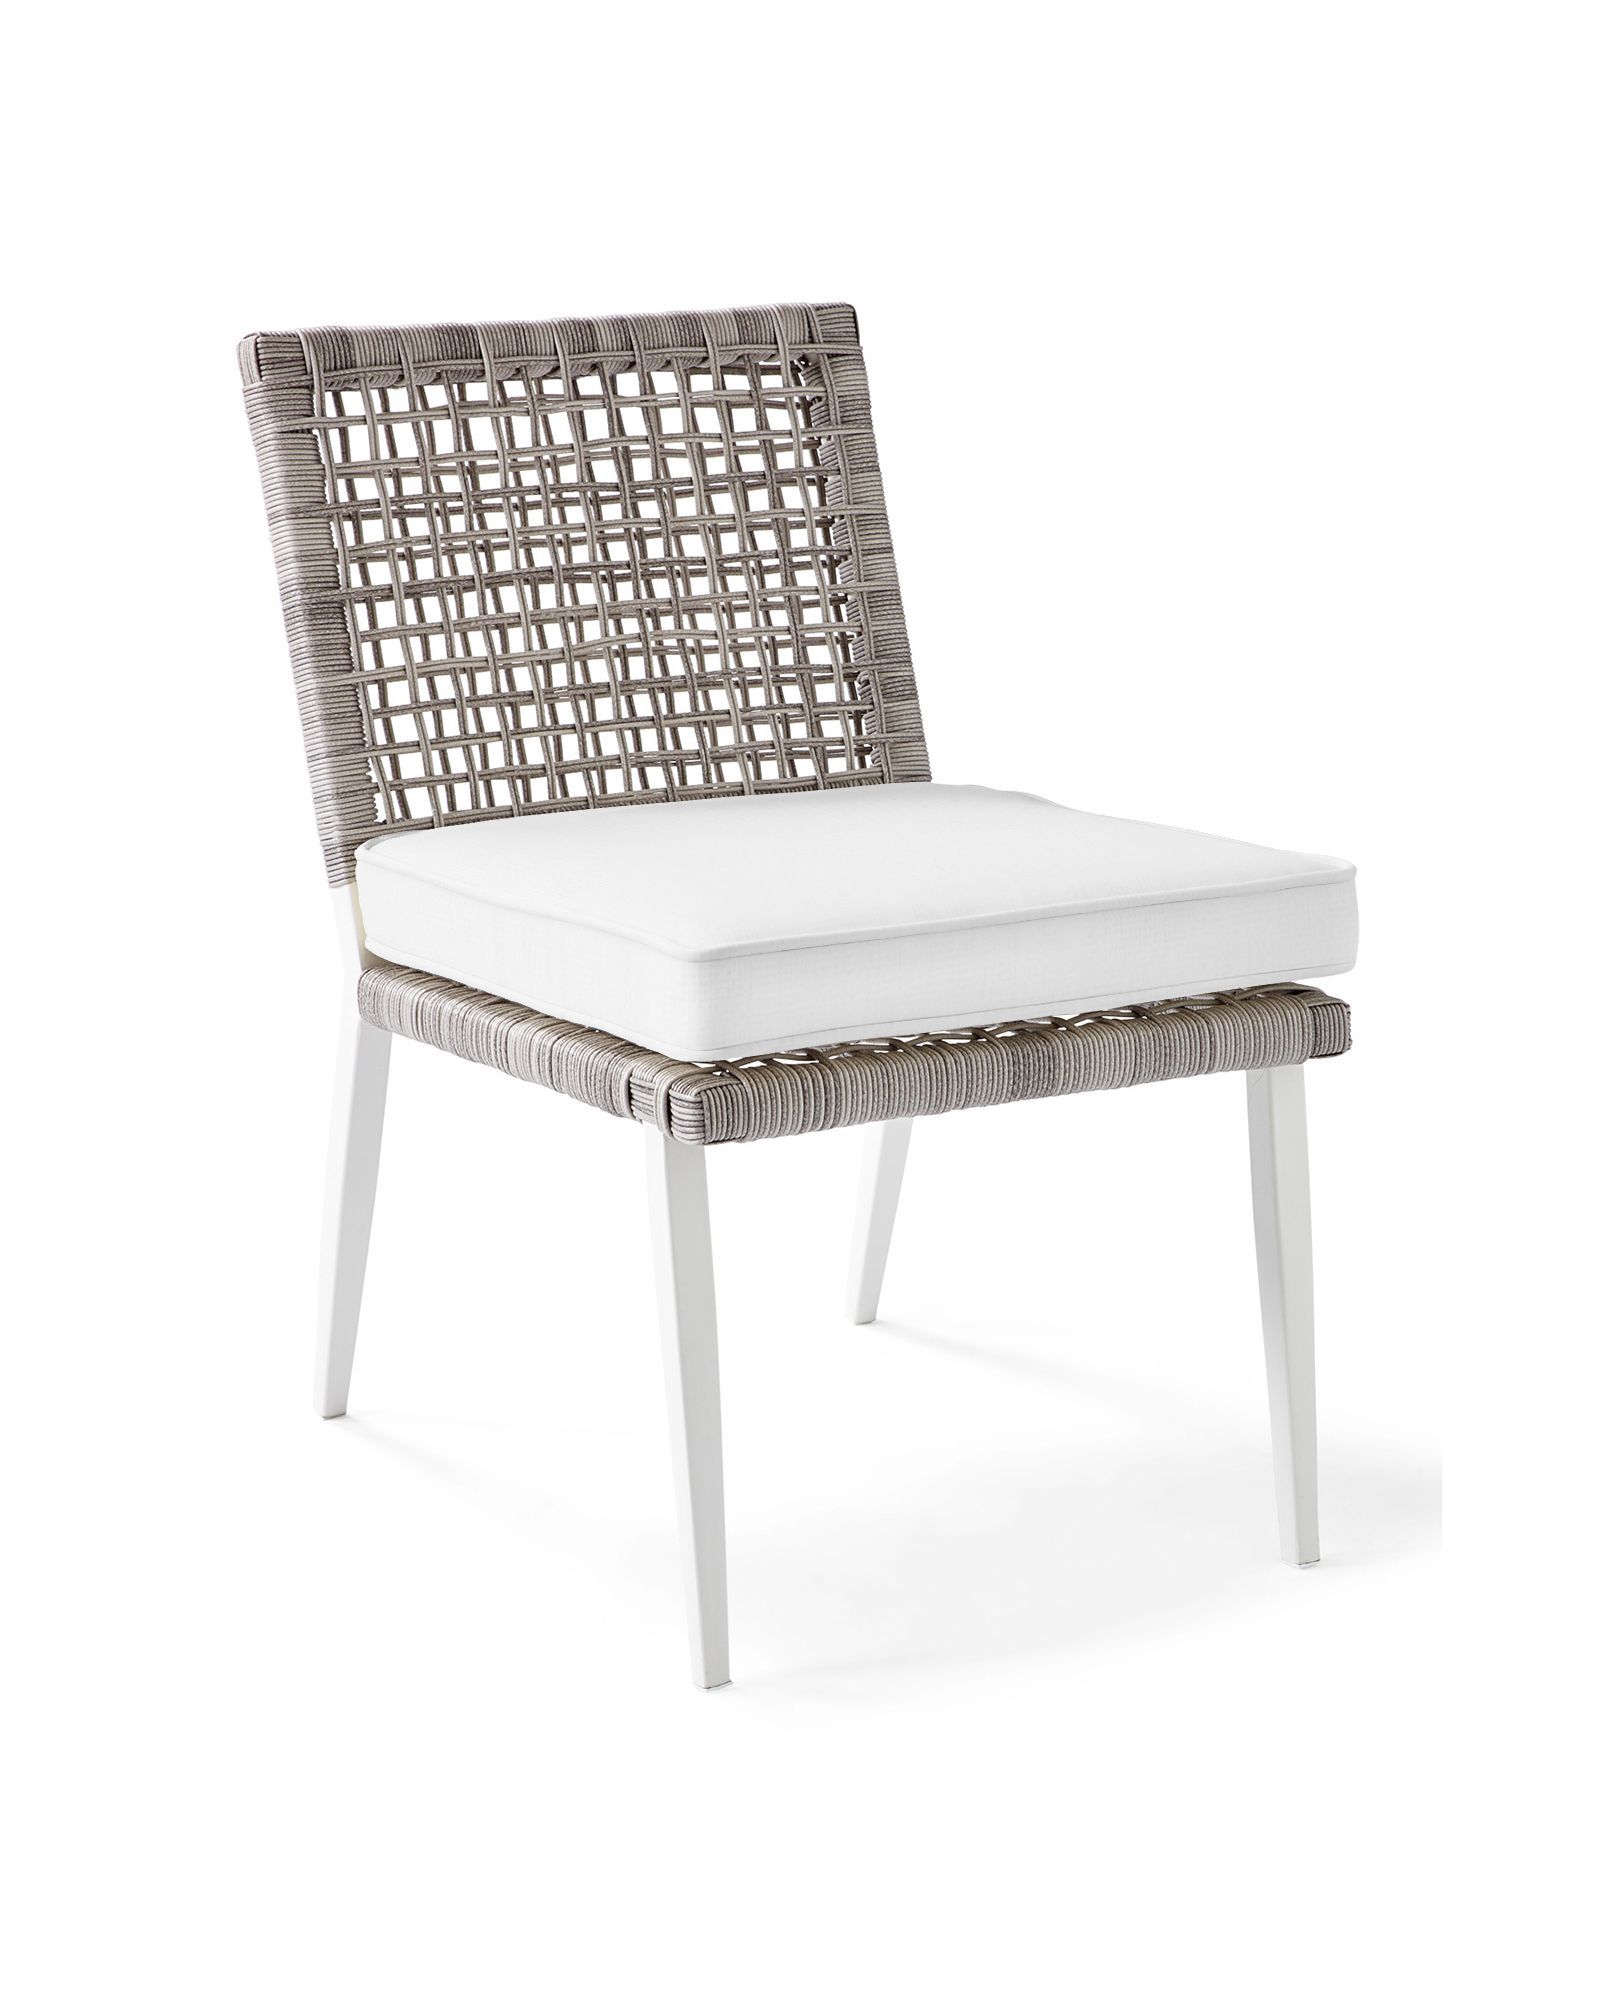 Waterfront Side Chair | Serena and Lily